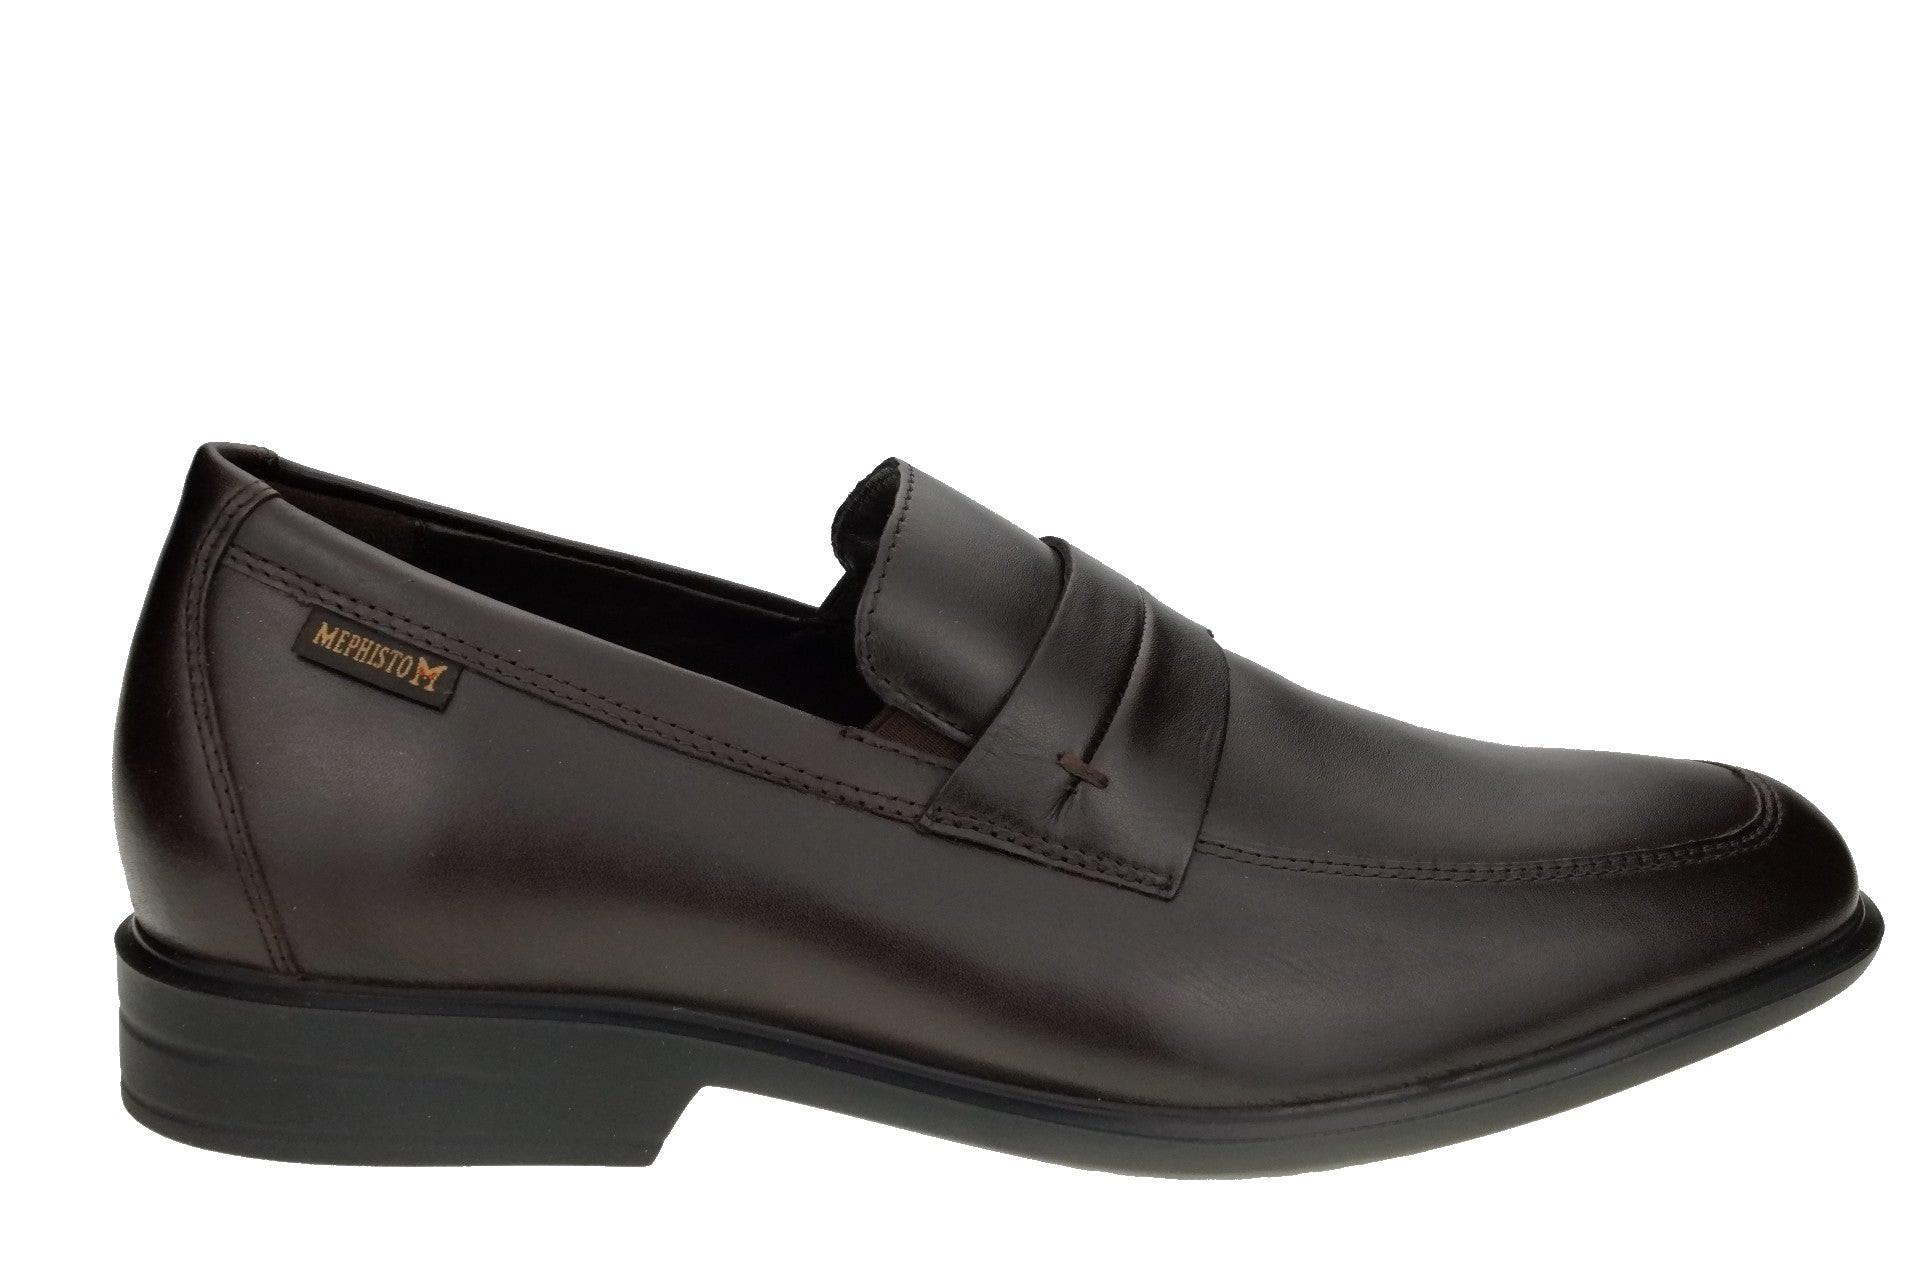 Mephisto  Eric - Loafer cuir 